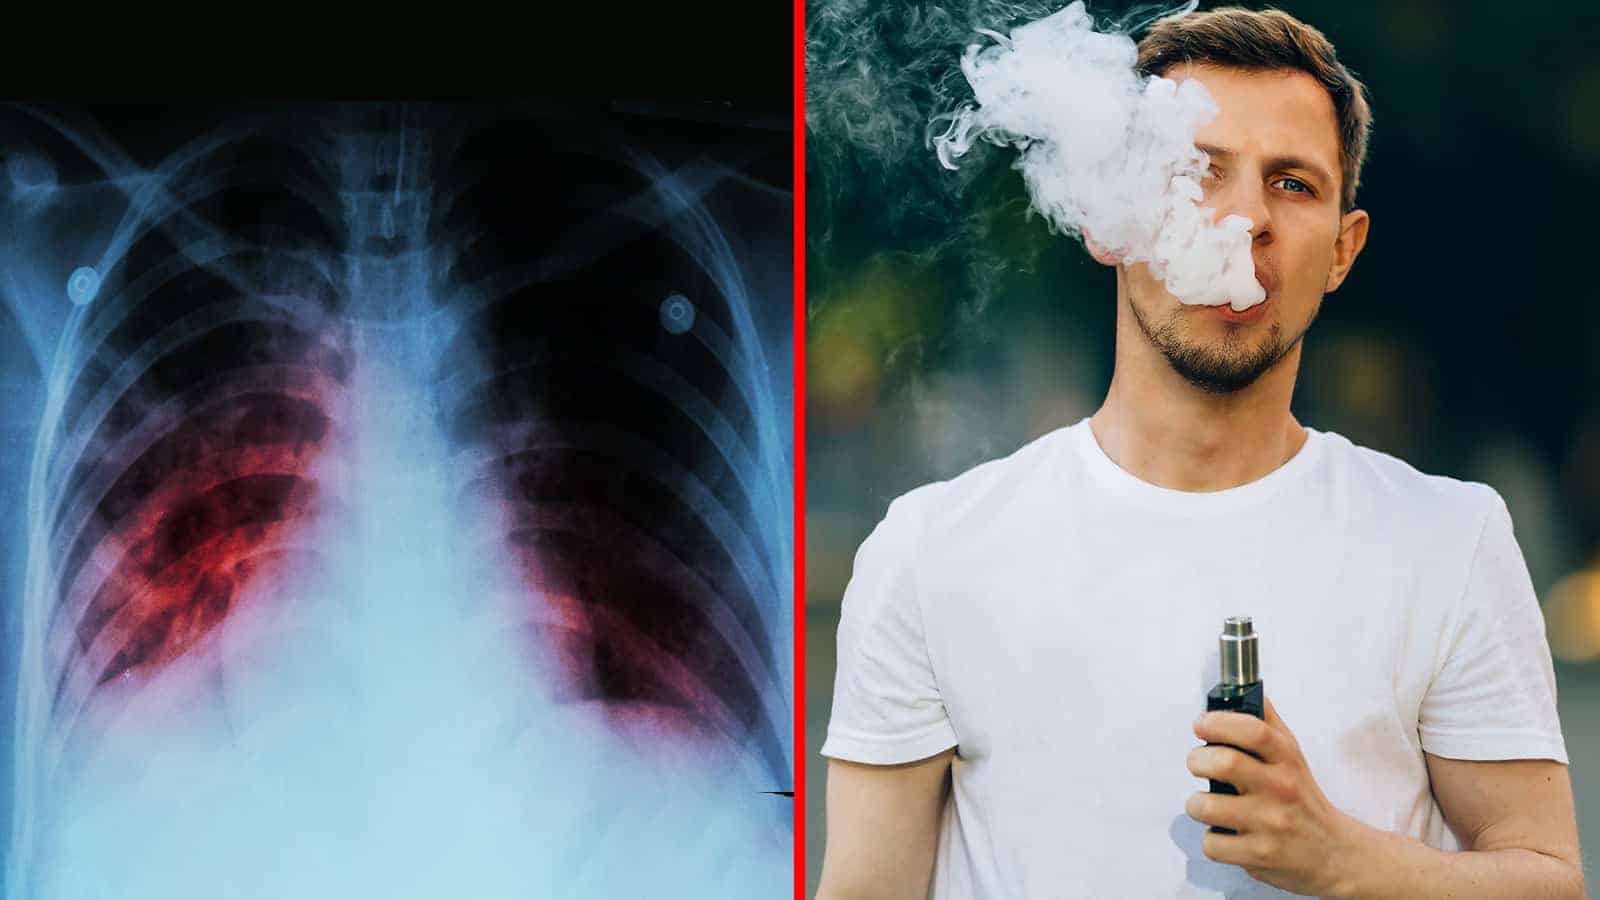 CDC Warns Against The Dangers of Vaping After Recent Spike in Lung-Related Illnesses